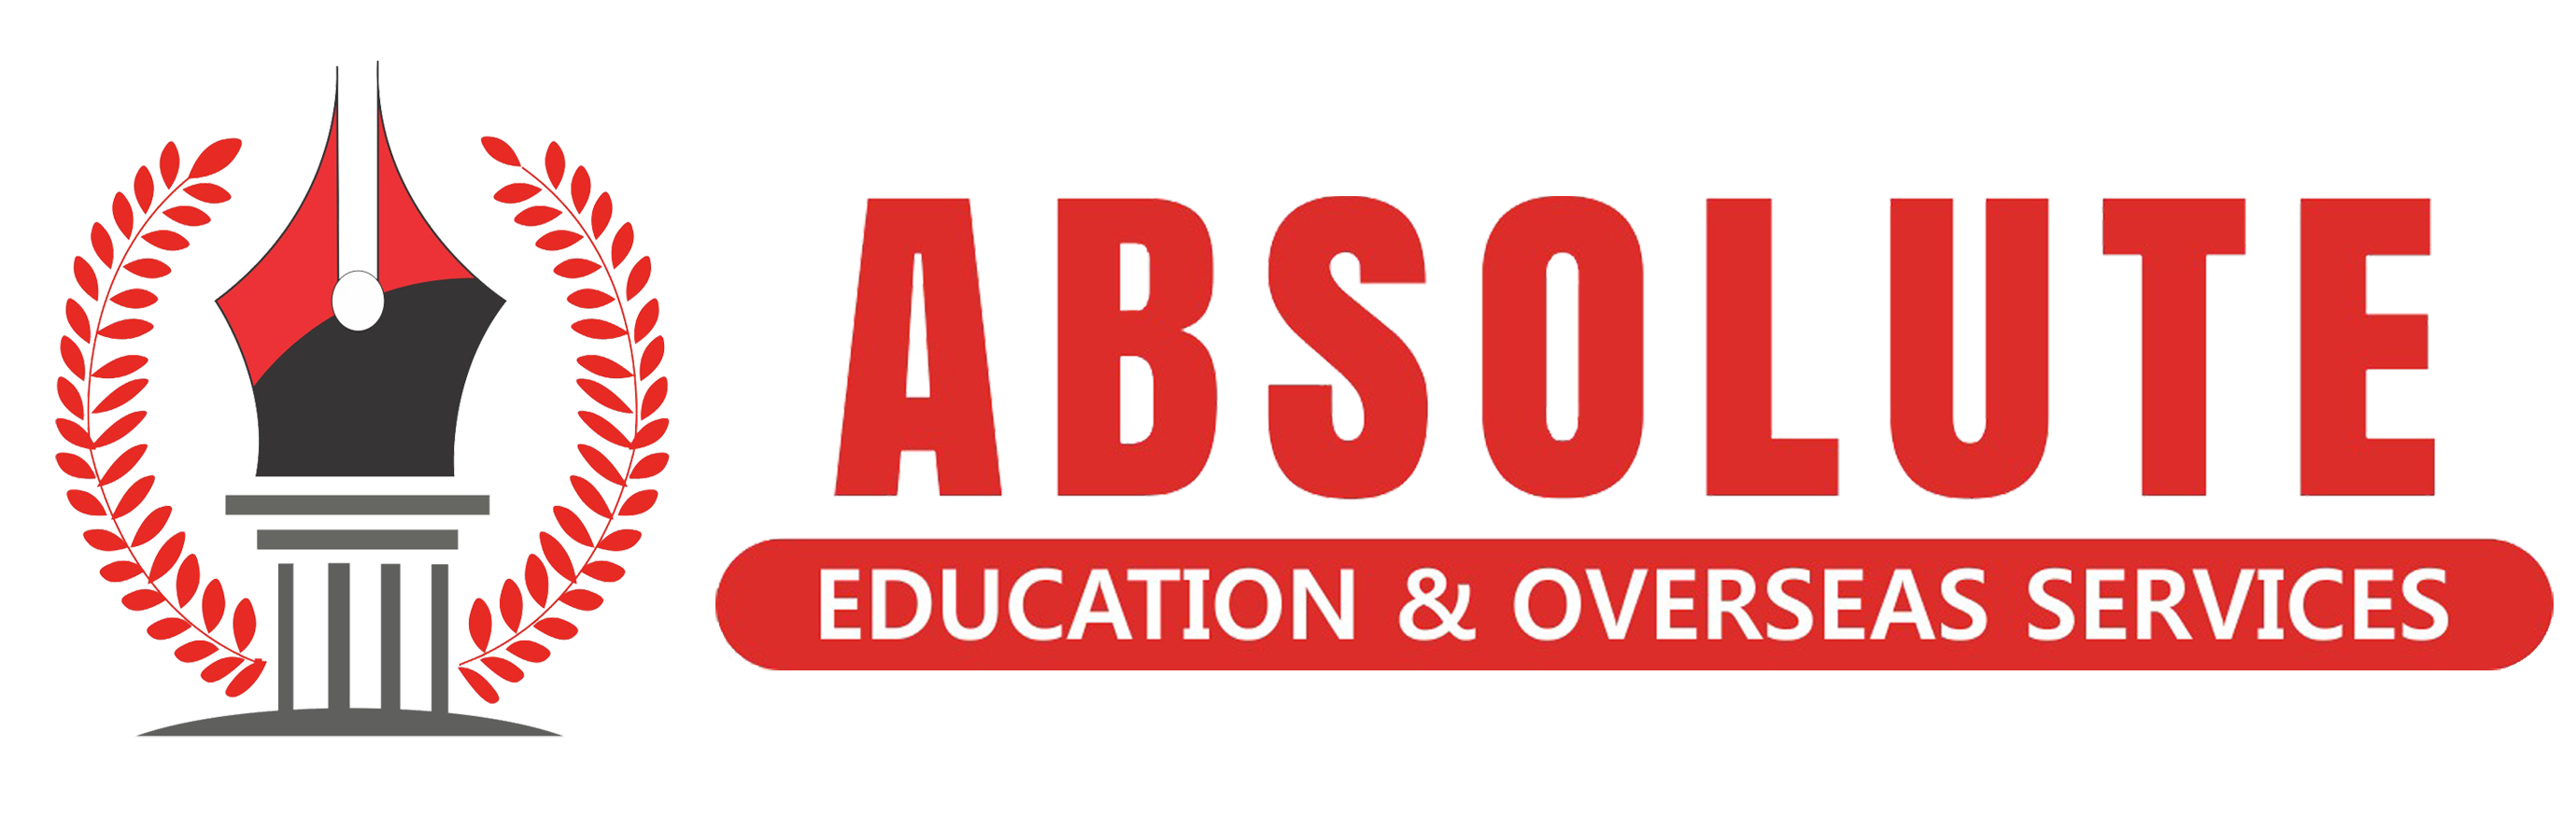 ABSOLUTE Education & Overseas Services